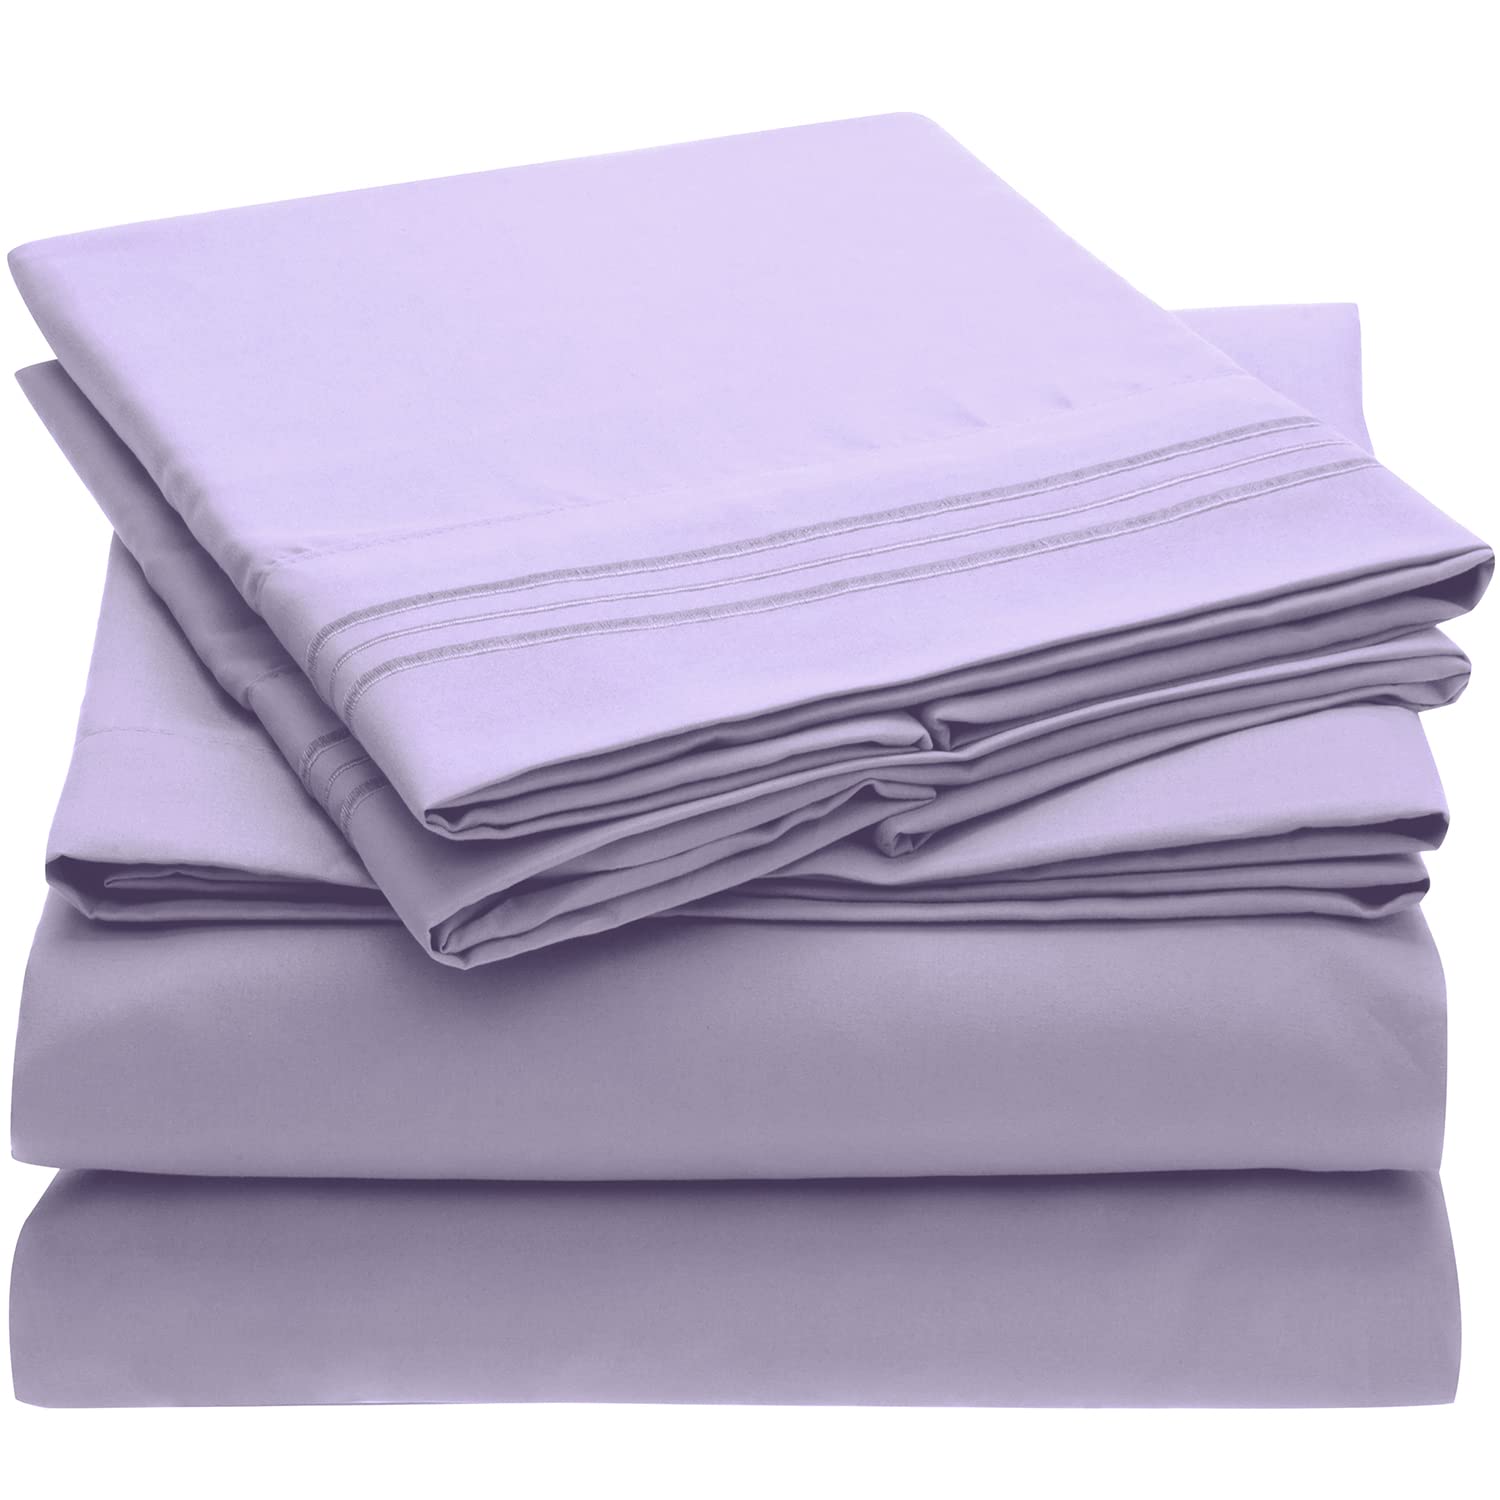 Book Cover Mellanni Full Size Sheet Set - Iconic Collection Bedding Sheets & Pillowcases - Hotel Luxury, Extra Soft, Cooling Bed Sheets - Deep Pocket up to 16 inch - Easy Care - 4 PC (Full, Violet) Full Violet